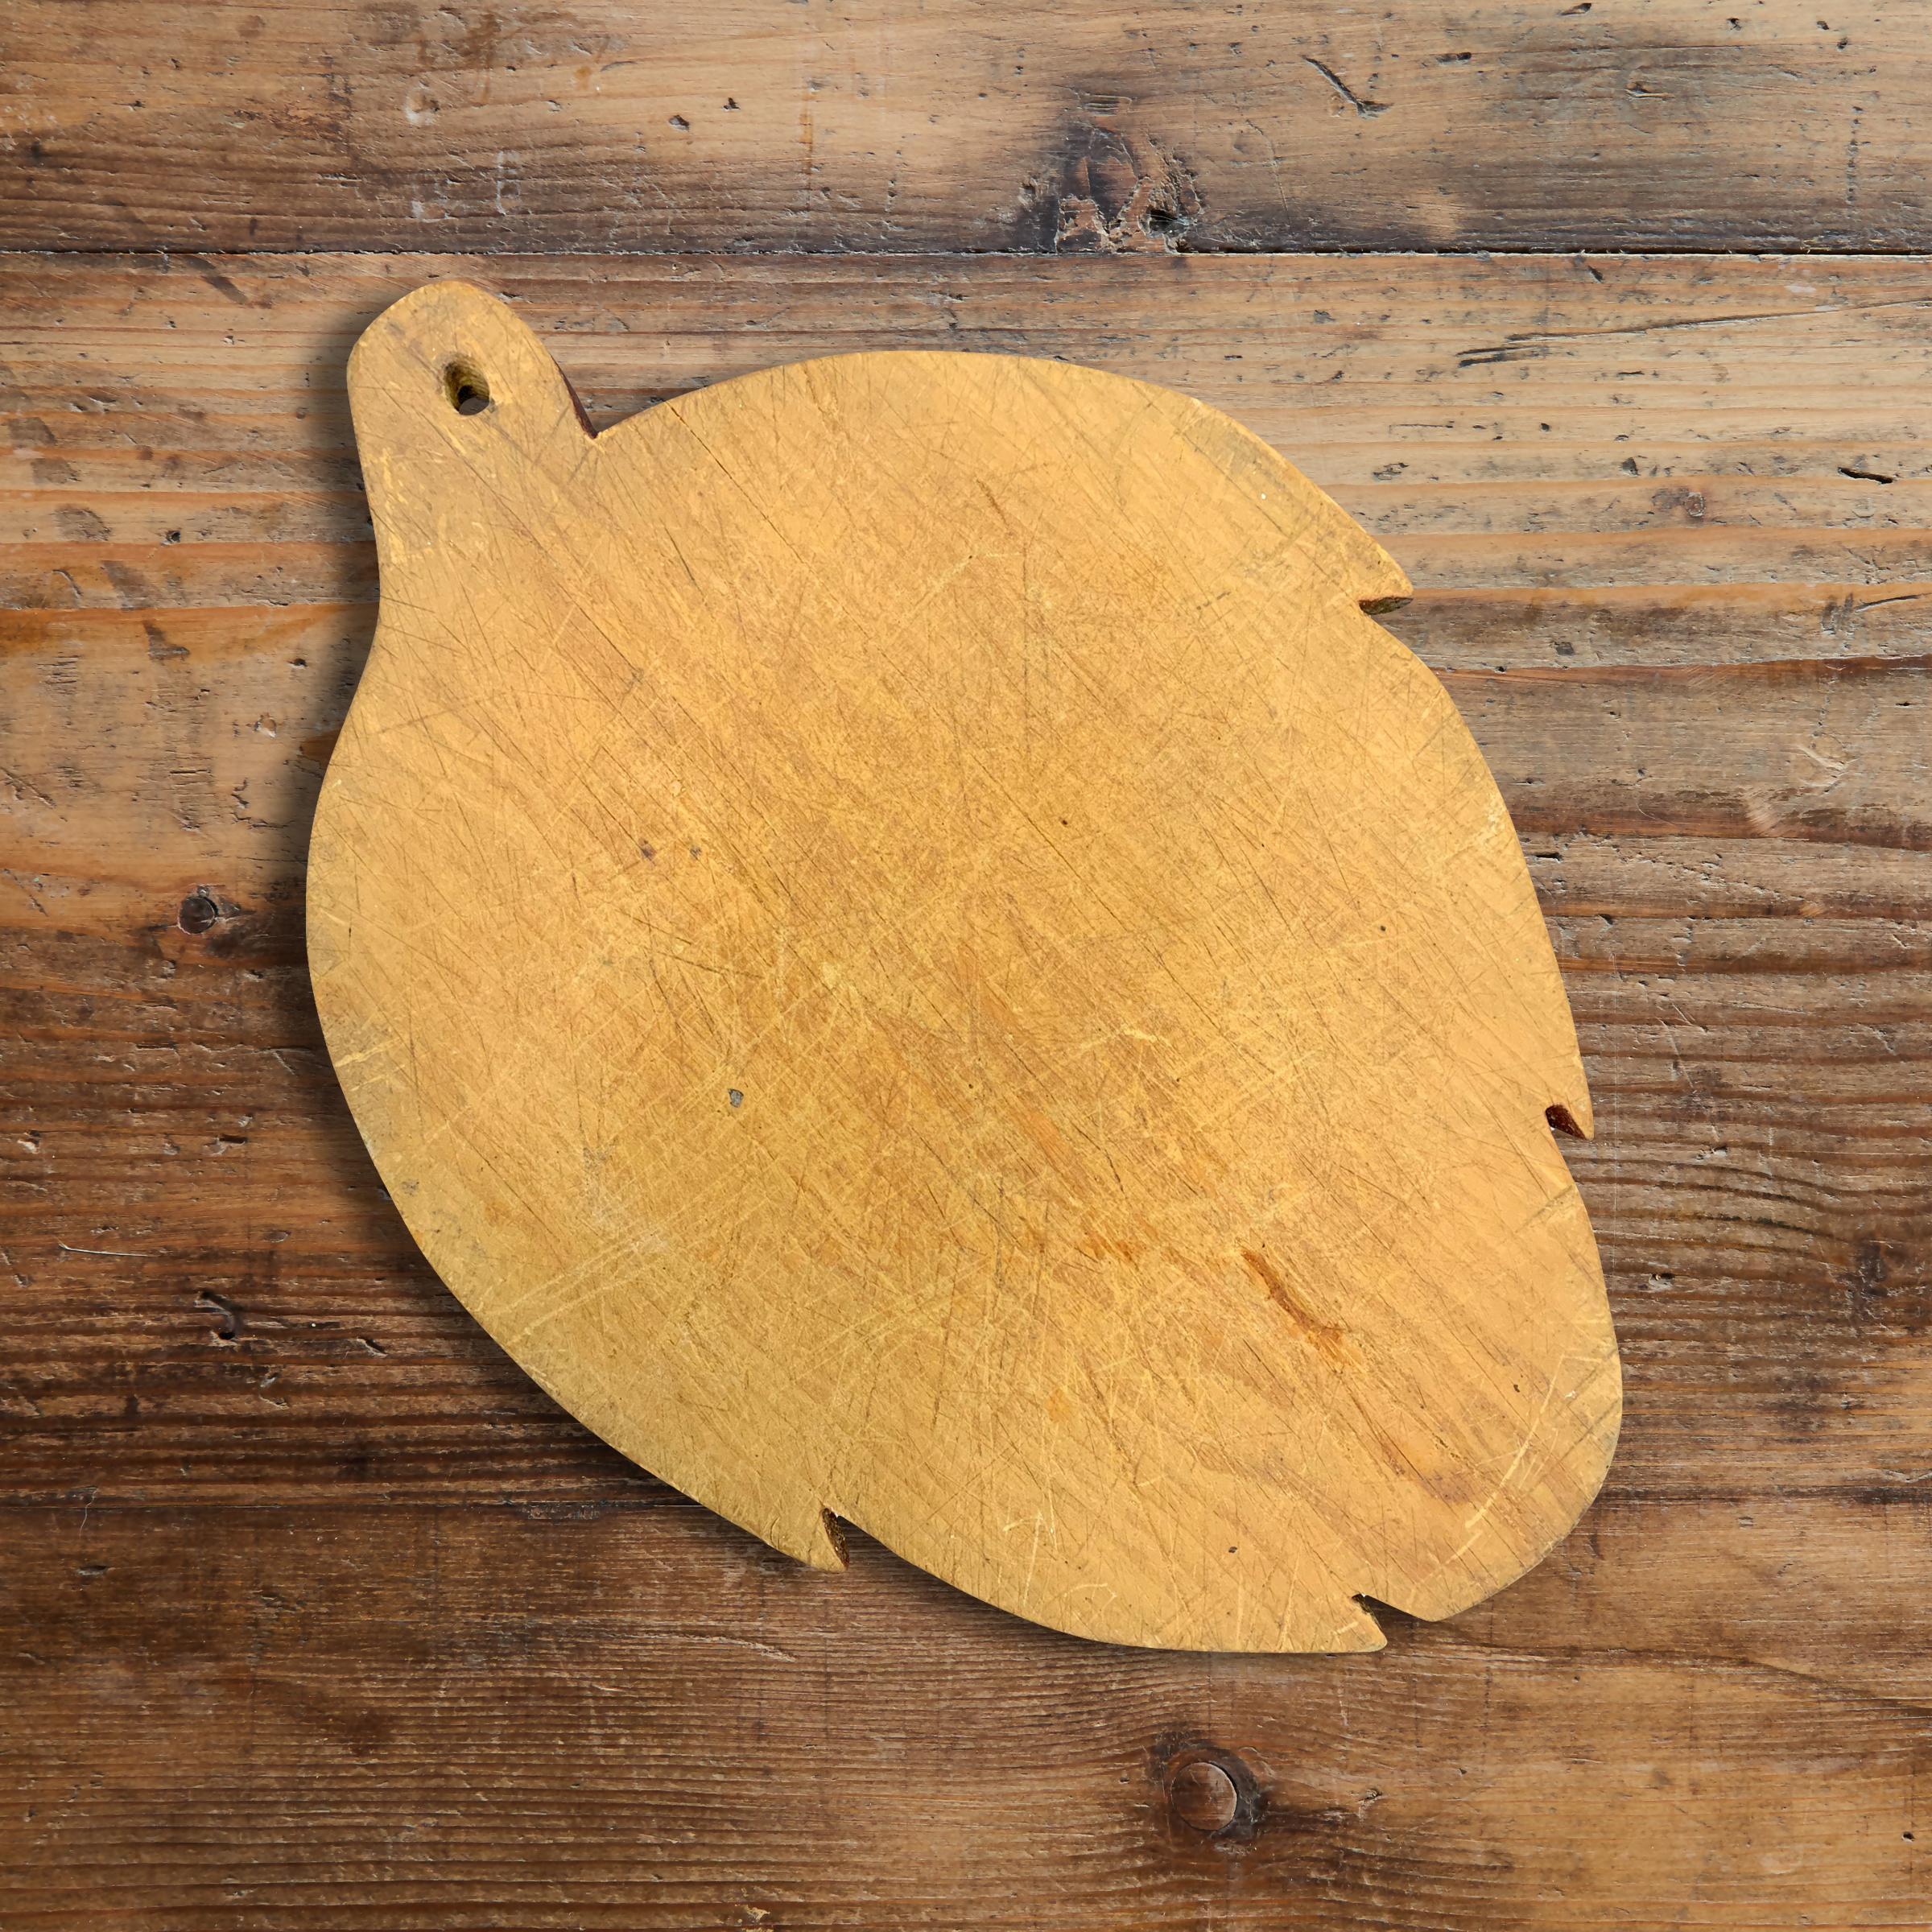 A whimsical early 20th century American pine artichoke-form cutting board with a red painted edge. Perfect for serving charcuterie and cheese at your next cocktail party, and works beautifully as a cutting board on your kitchen counter.